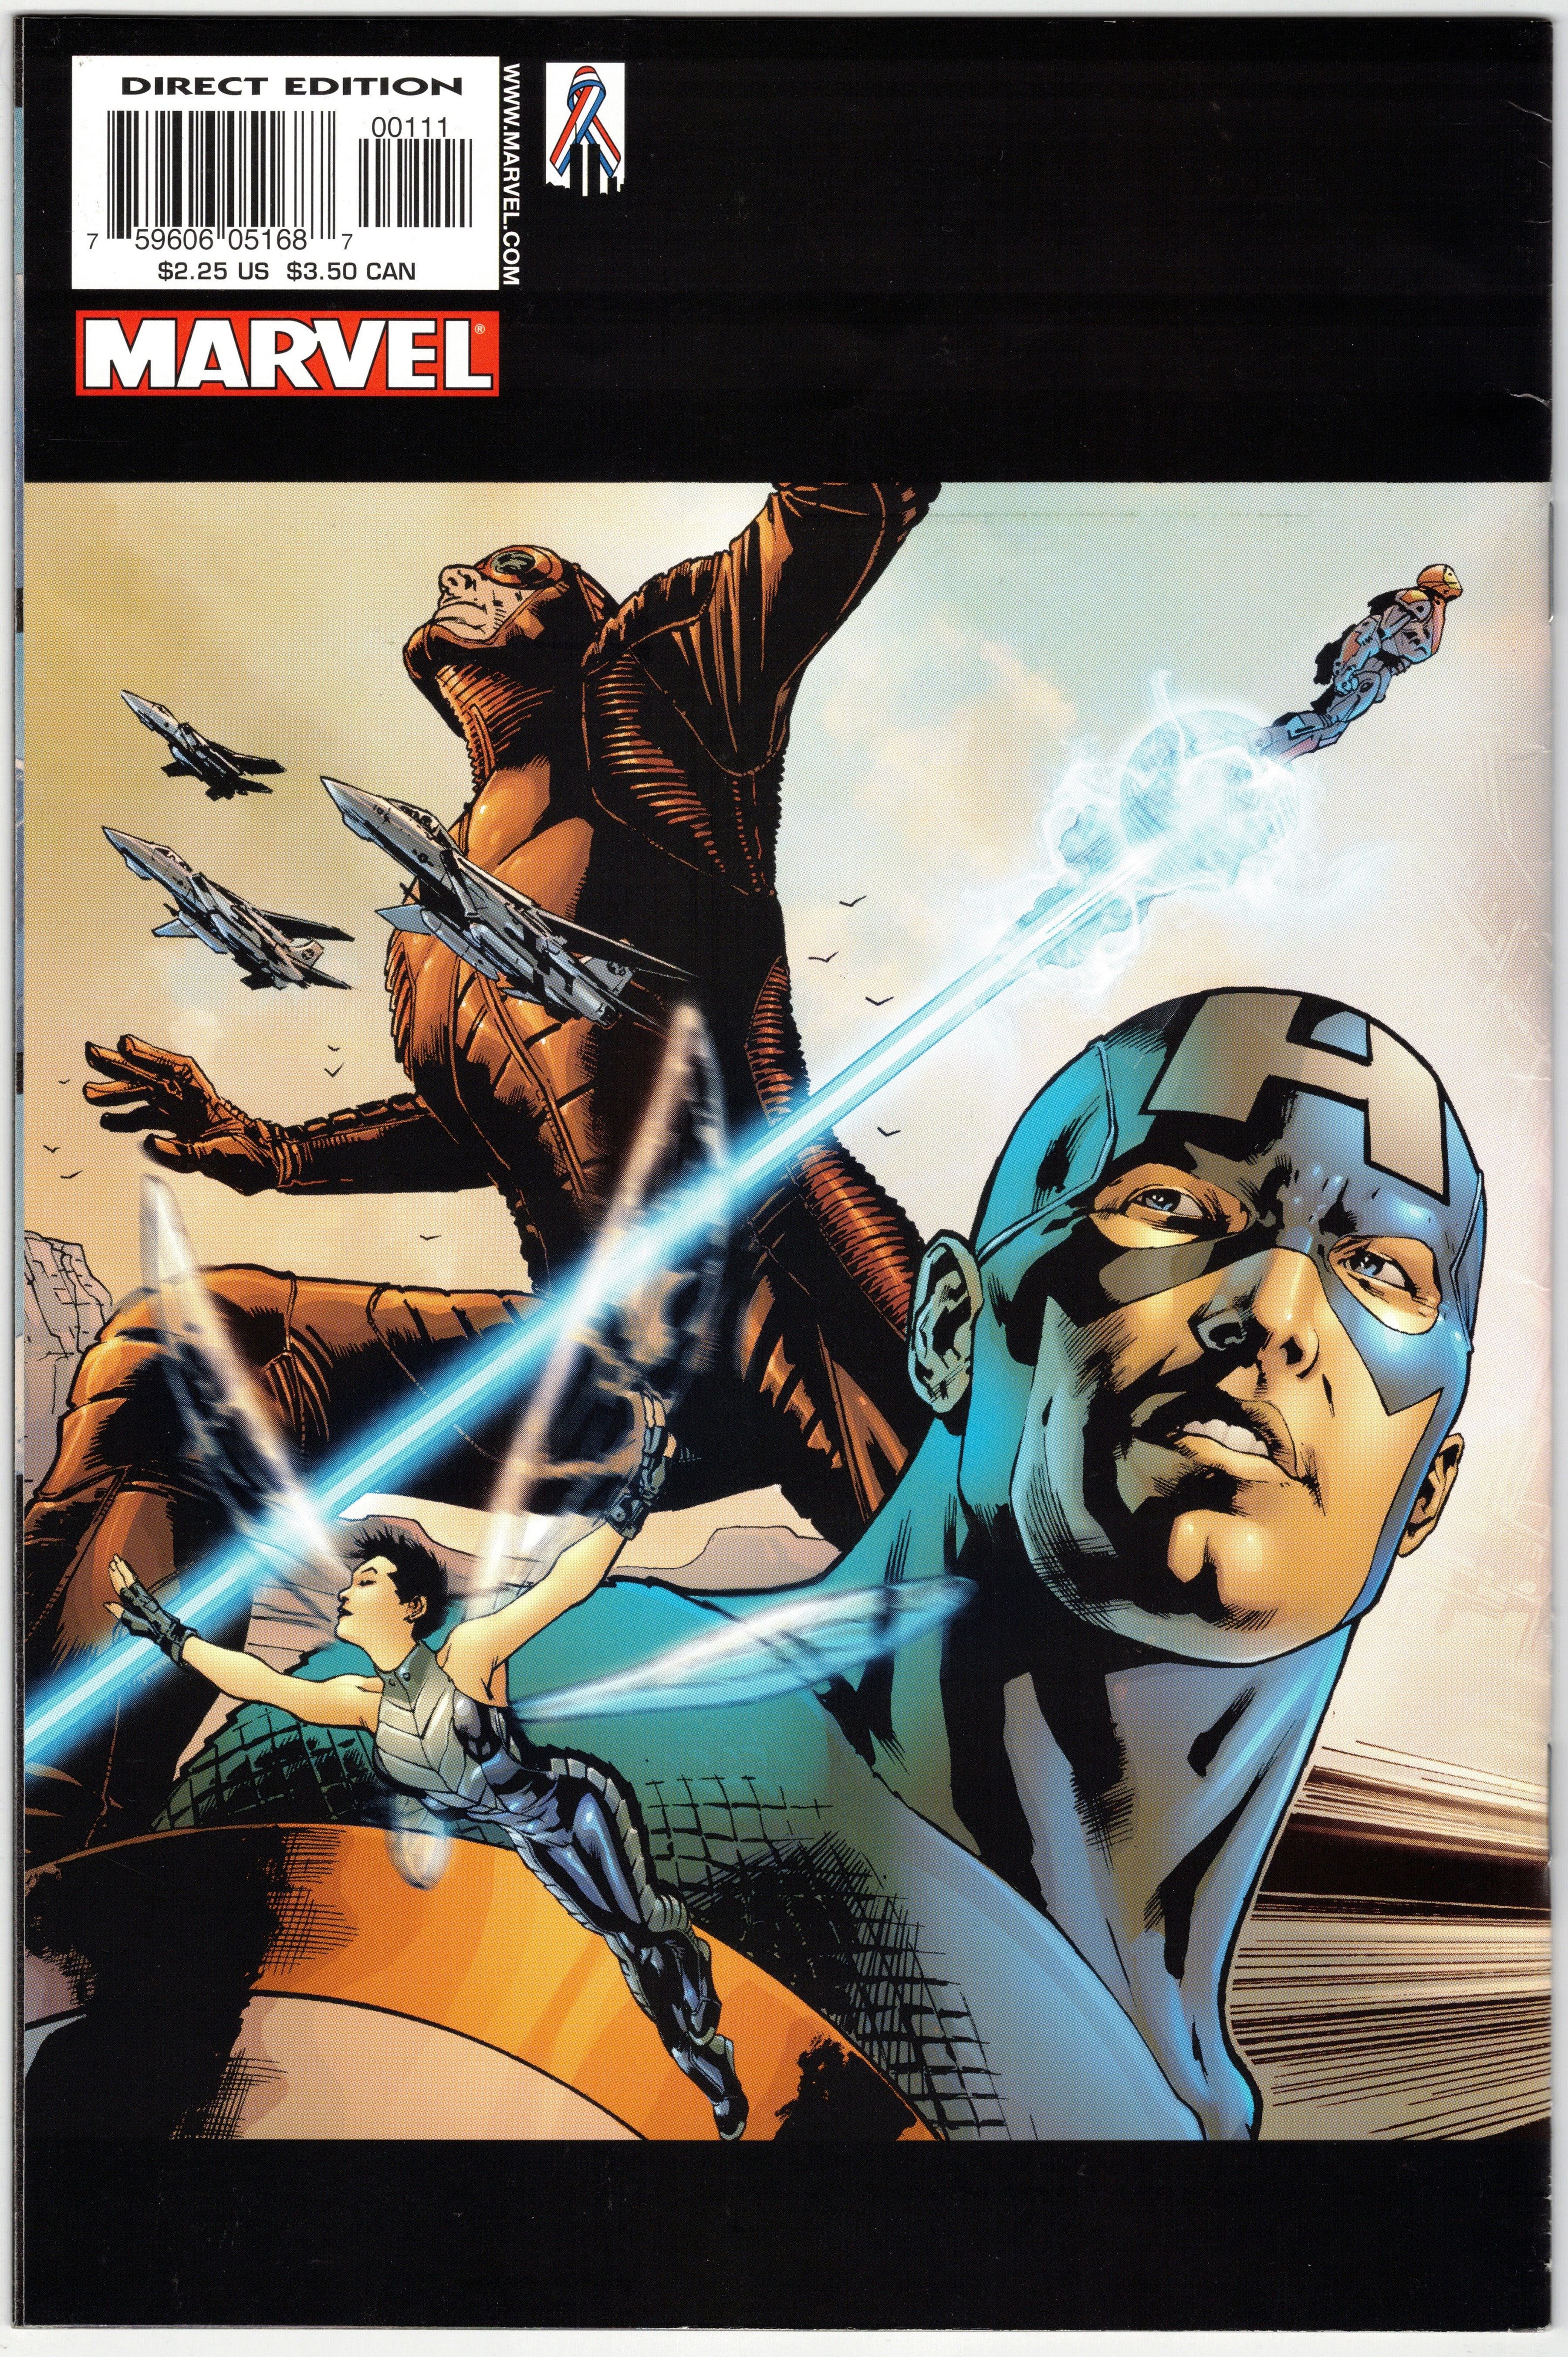 Photo of Ultimates, Vol. 1 (2002) Issue 1A - Near Mint Comic sold by Stronghold Collectibles